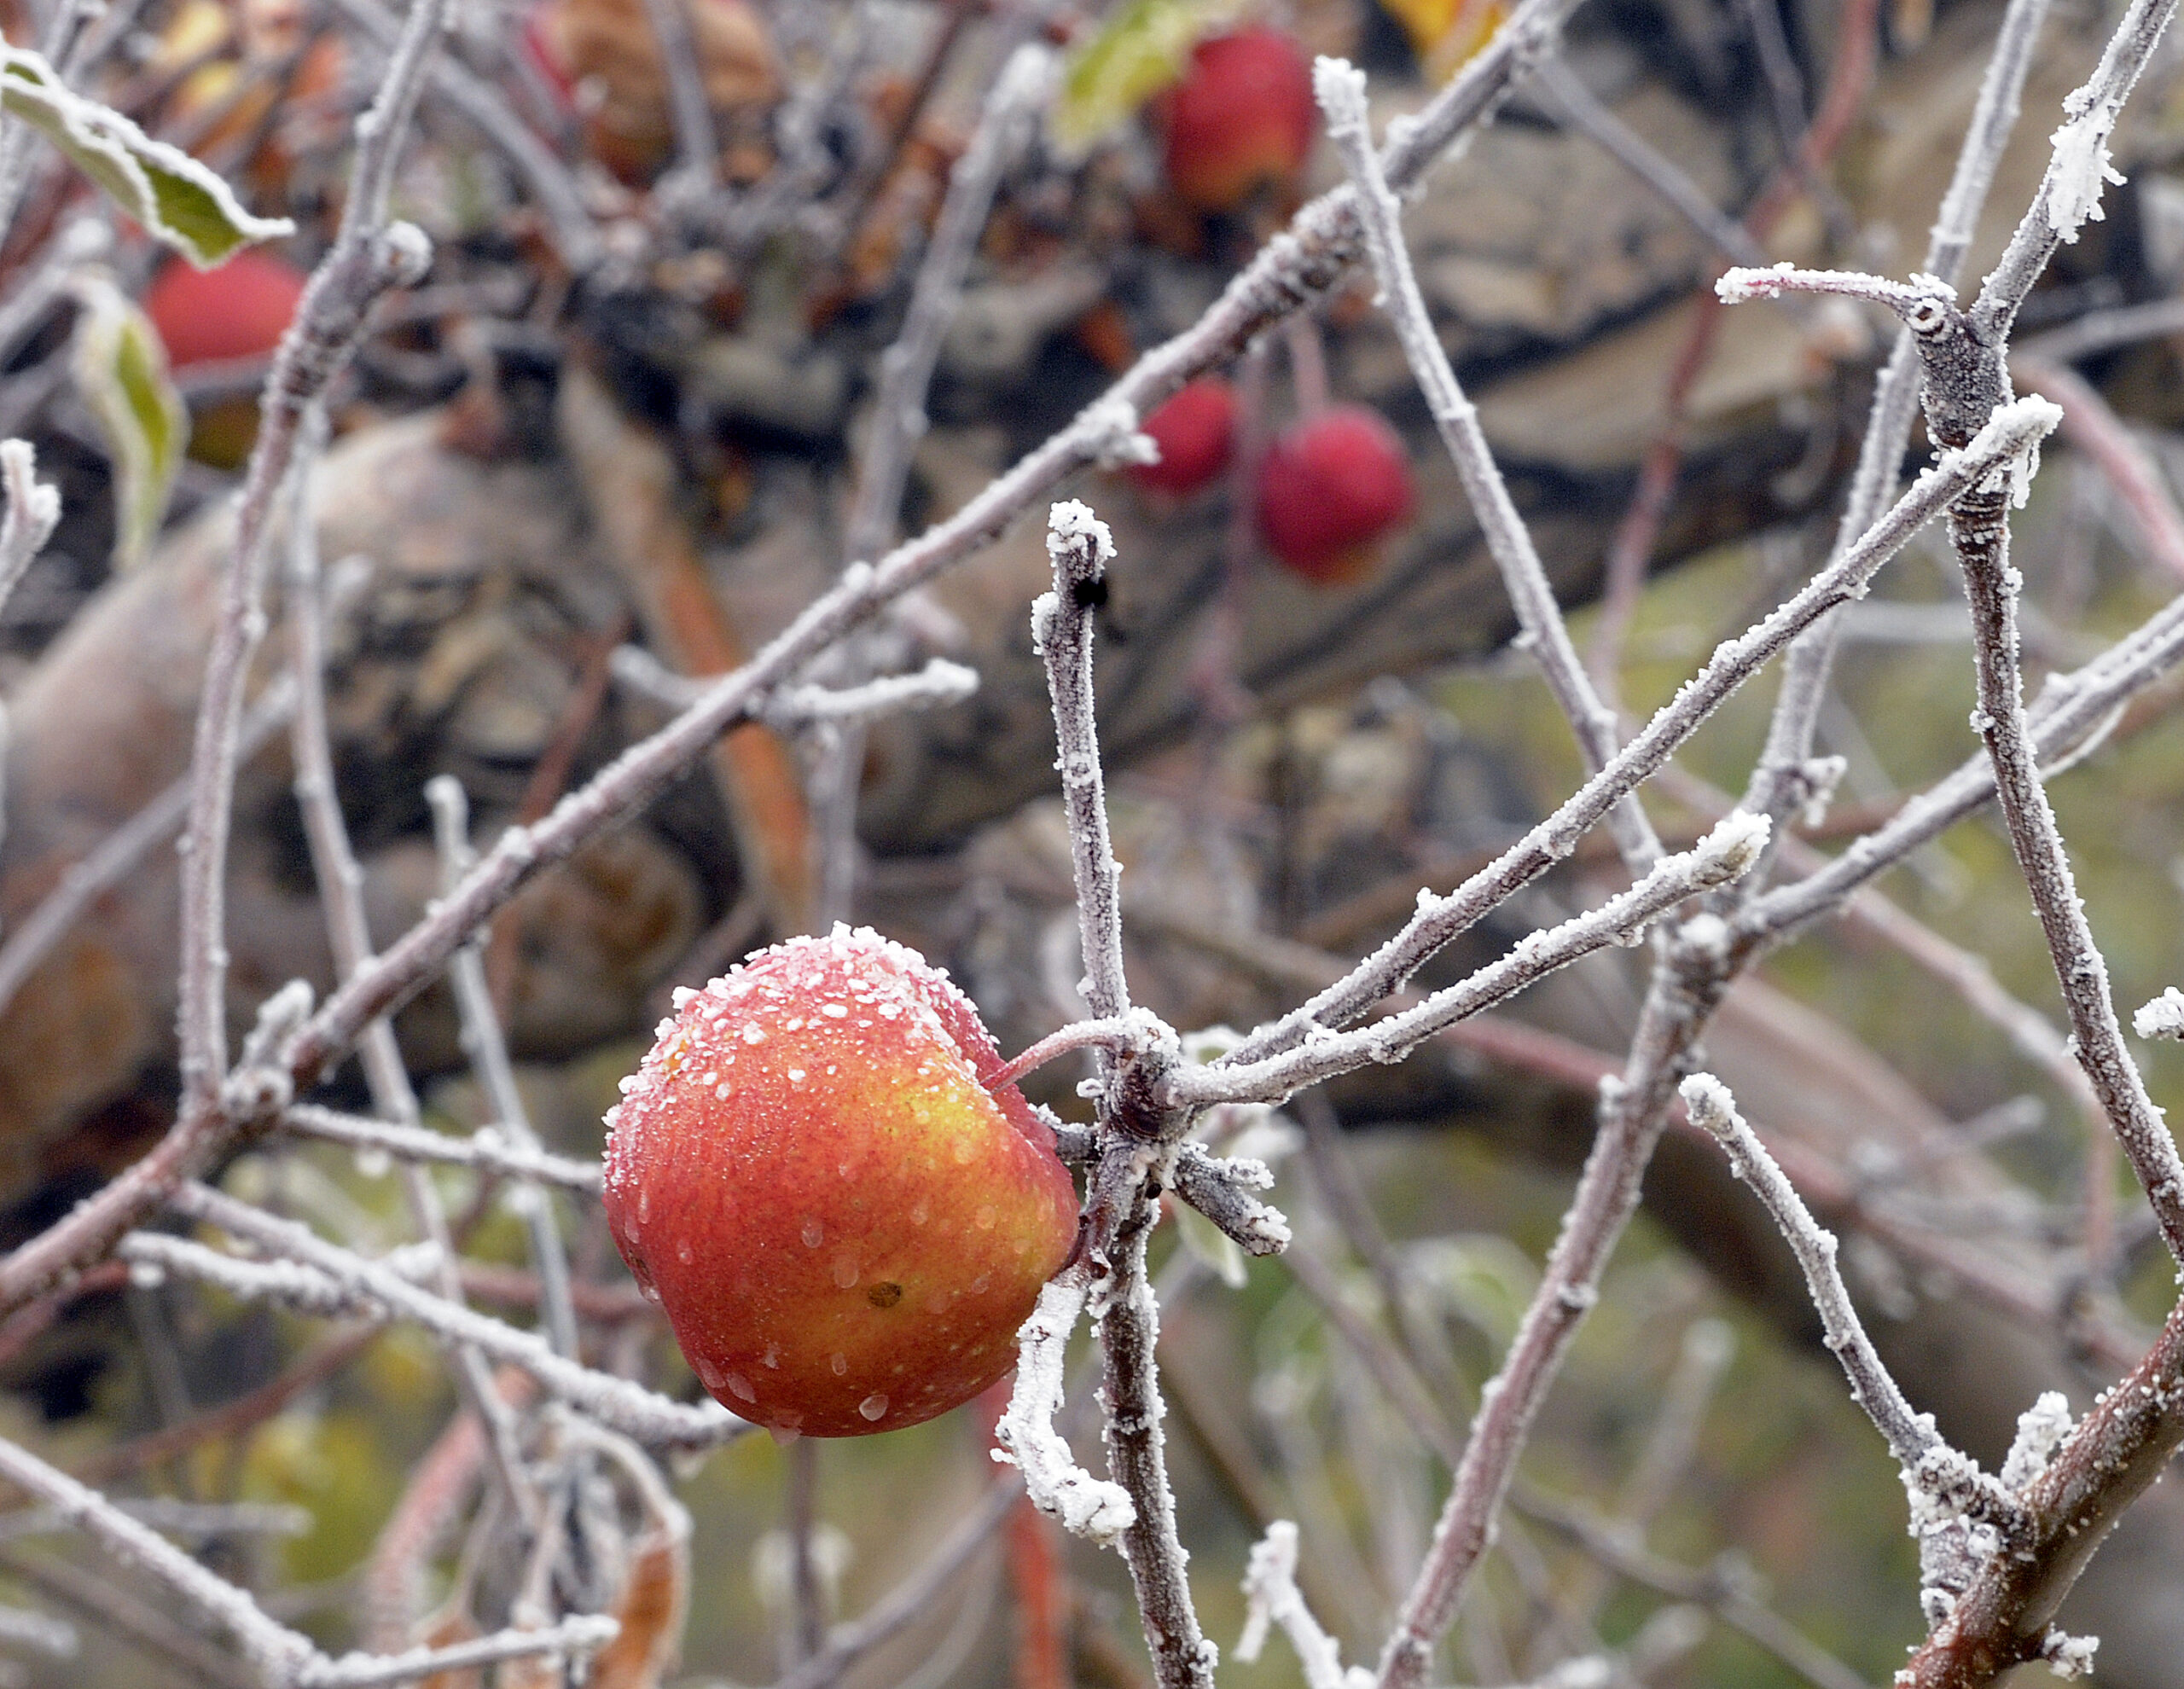 Wisconsin Fruit Growers Protect Crops As Freezing Temperatures Return